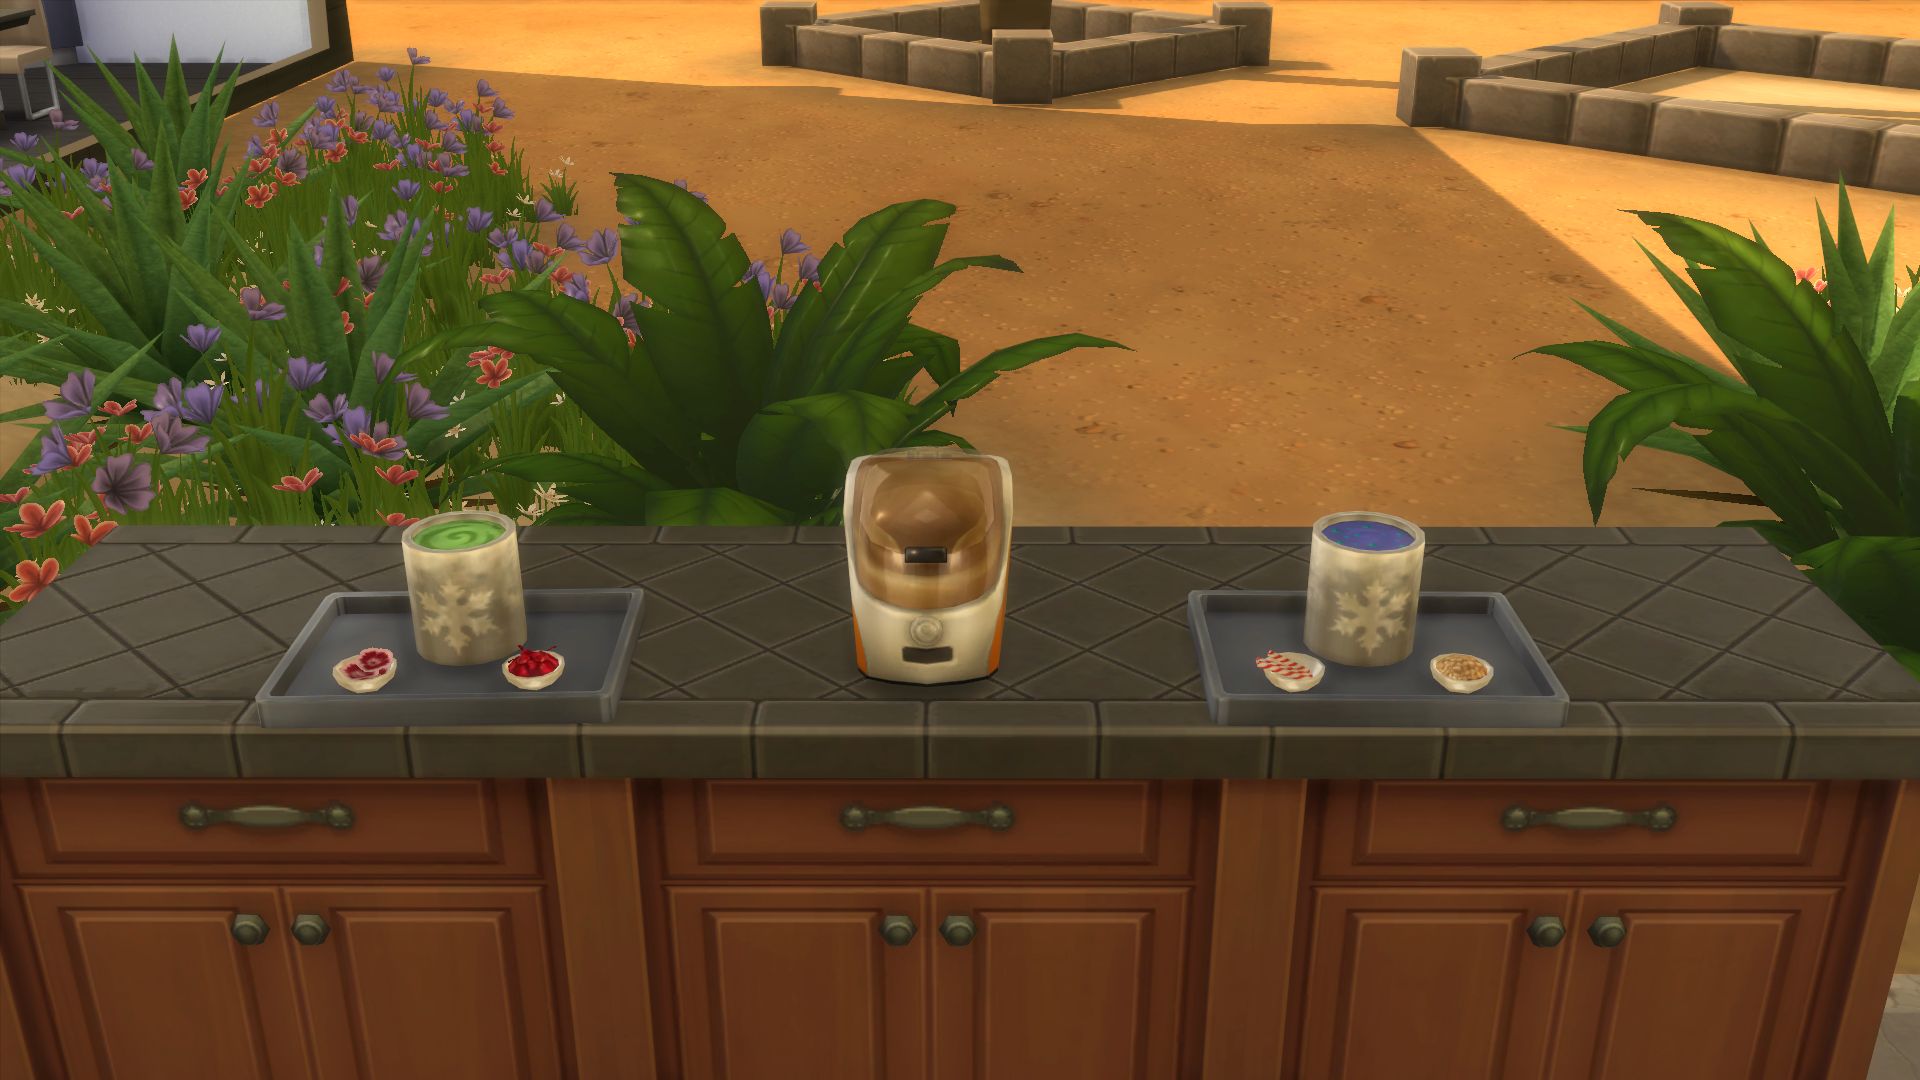 The Sims 4 Cool Kitchen Stuff (Overview) 